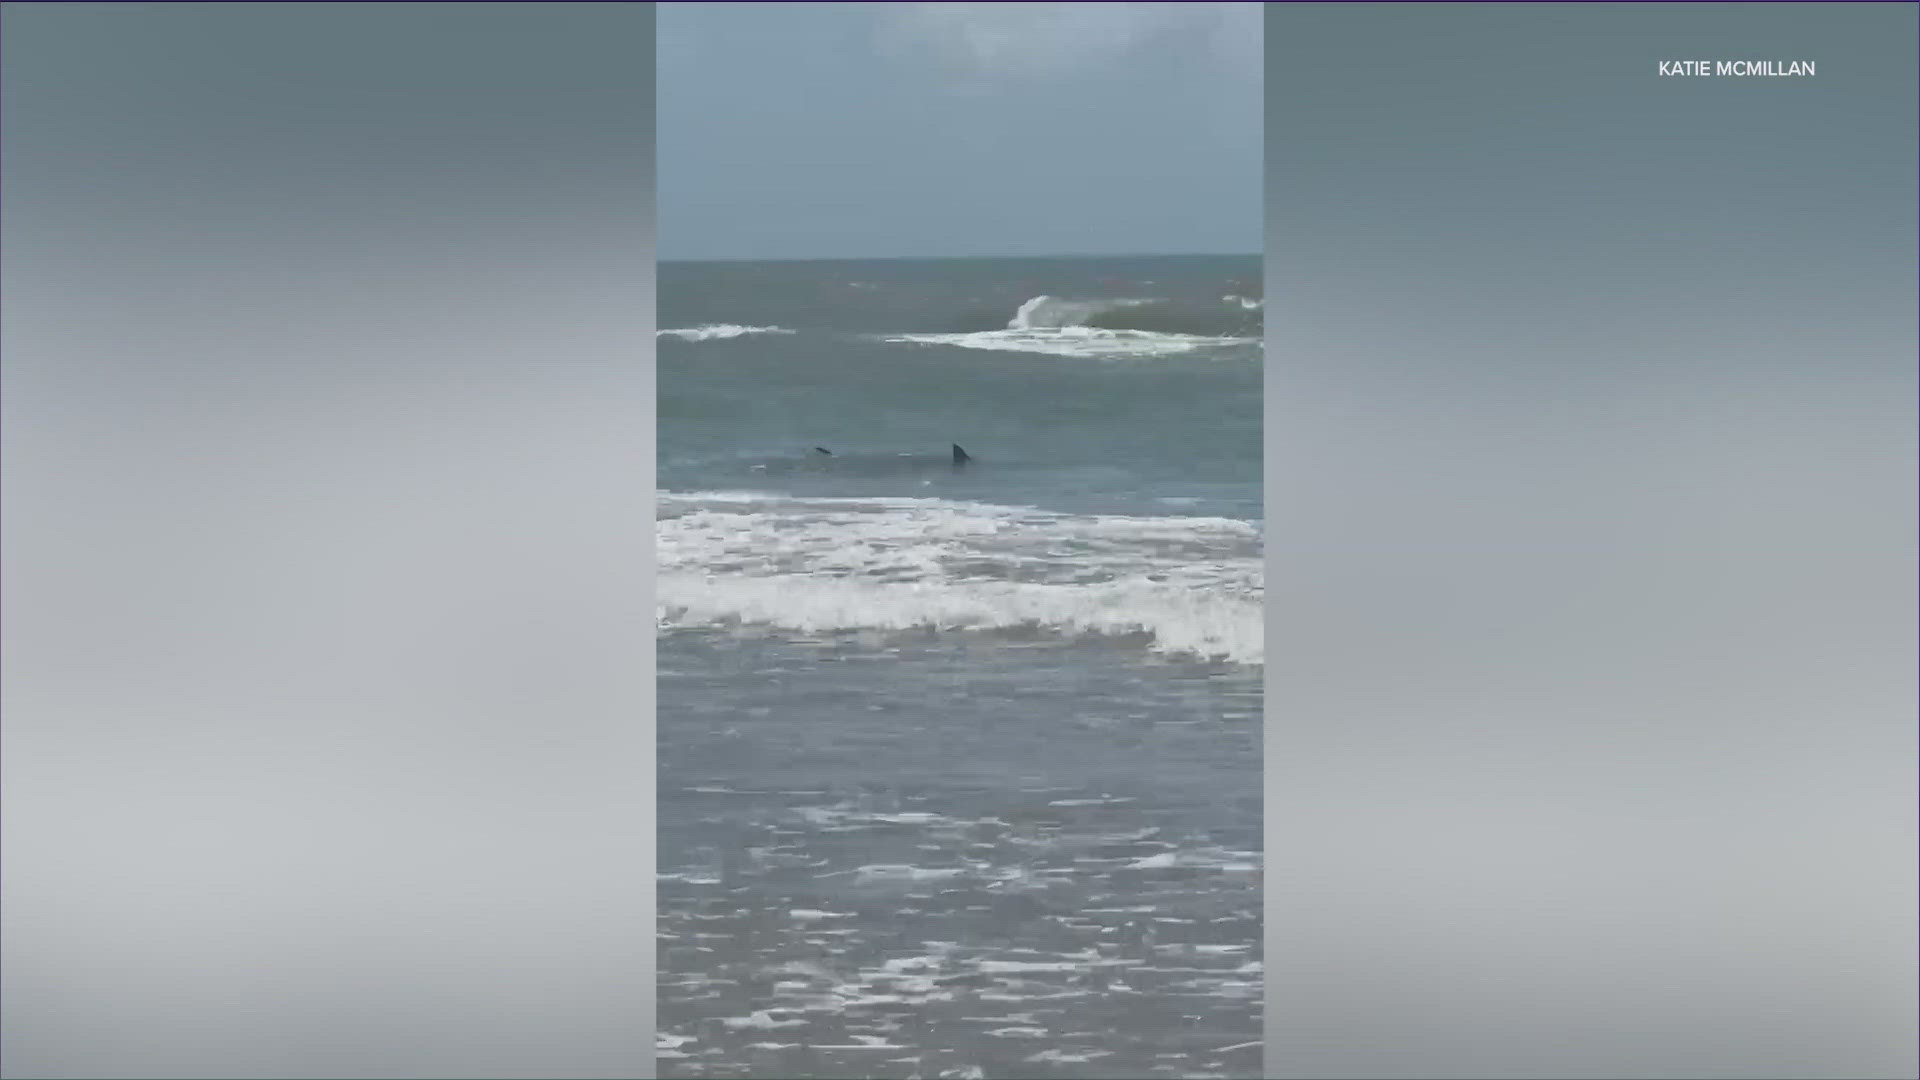 Officials believe the one shark is responsible for all four attacks on Thursday.